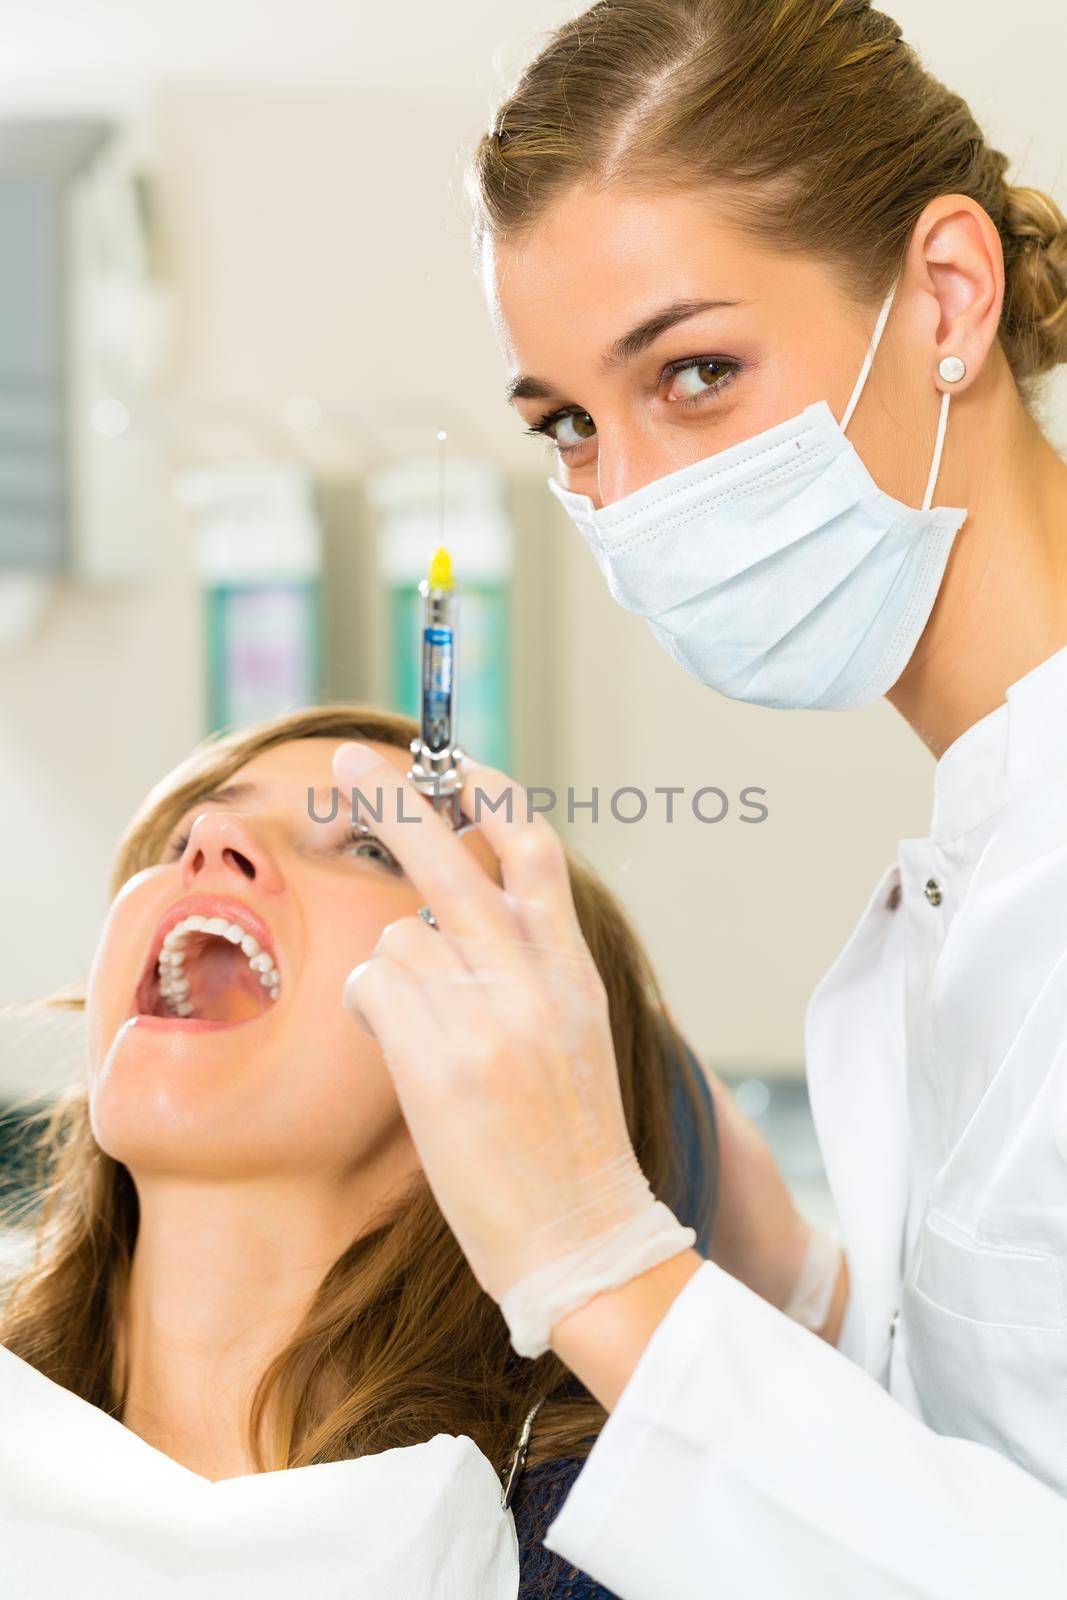 dentist holding a syringe and anesthetizing her patient by Kzenon